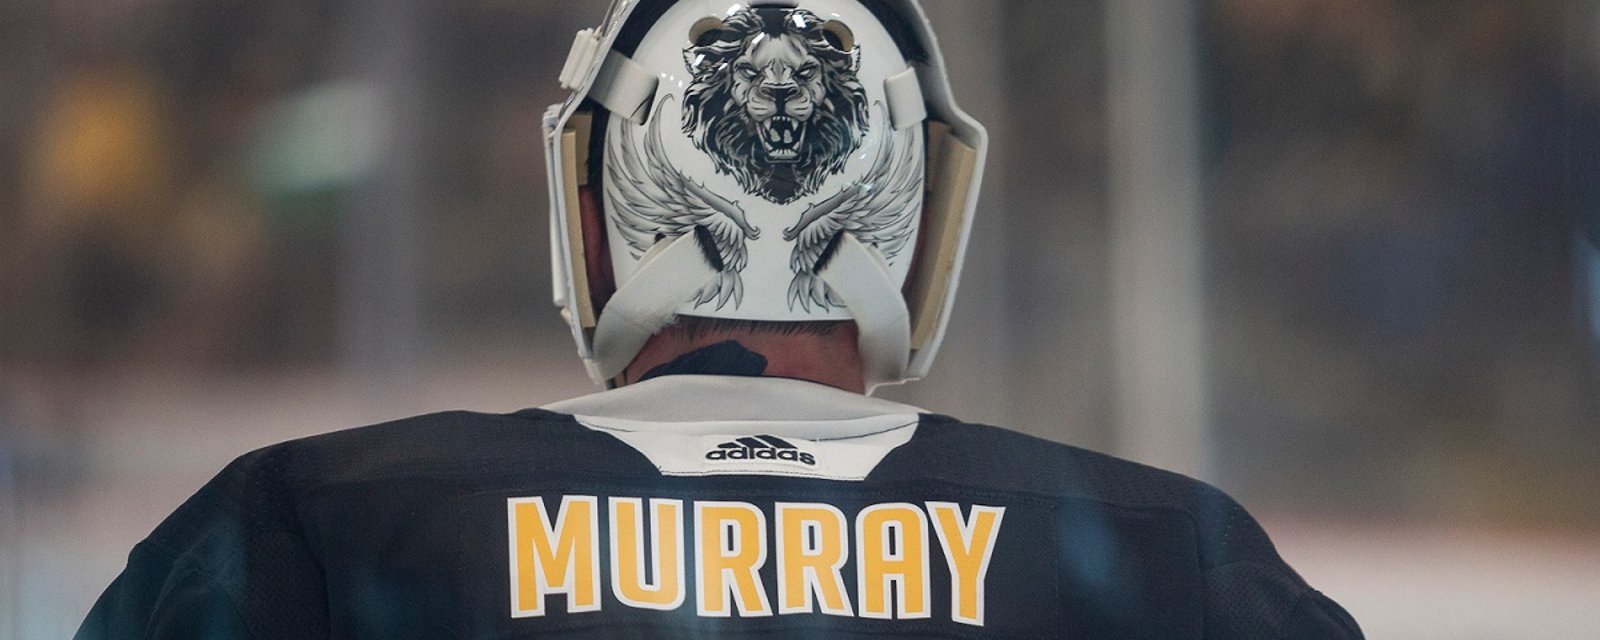 Ugly rumor circulating about Matt Murray appears to be a total hoax.